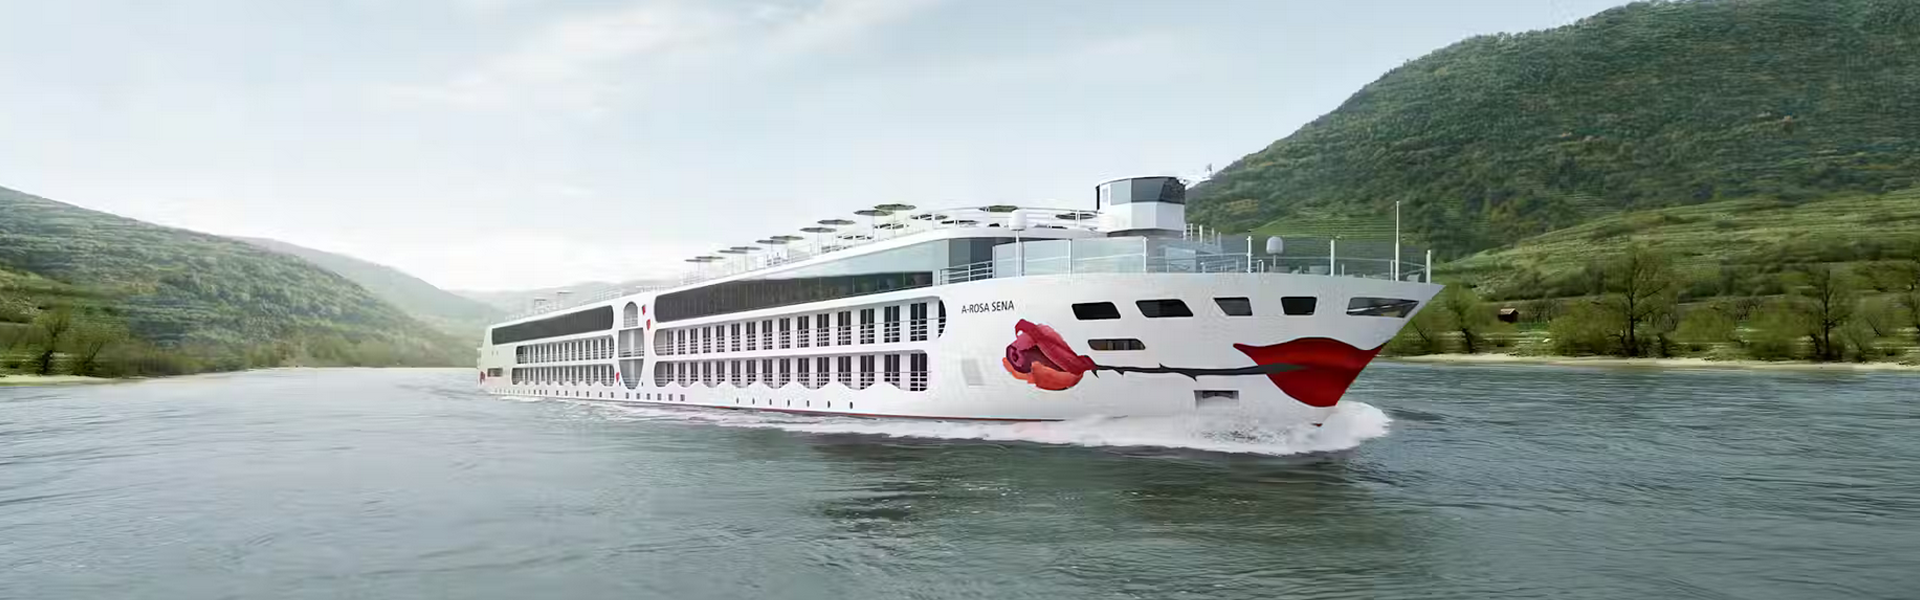 A-Rosa River Cruises in Europe